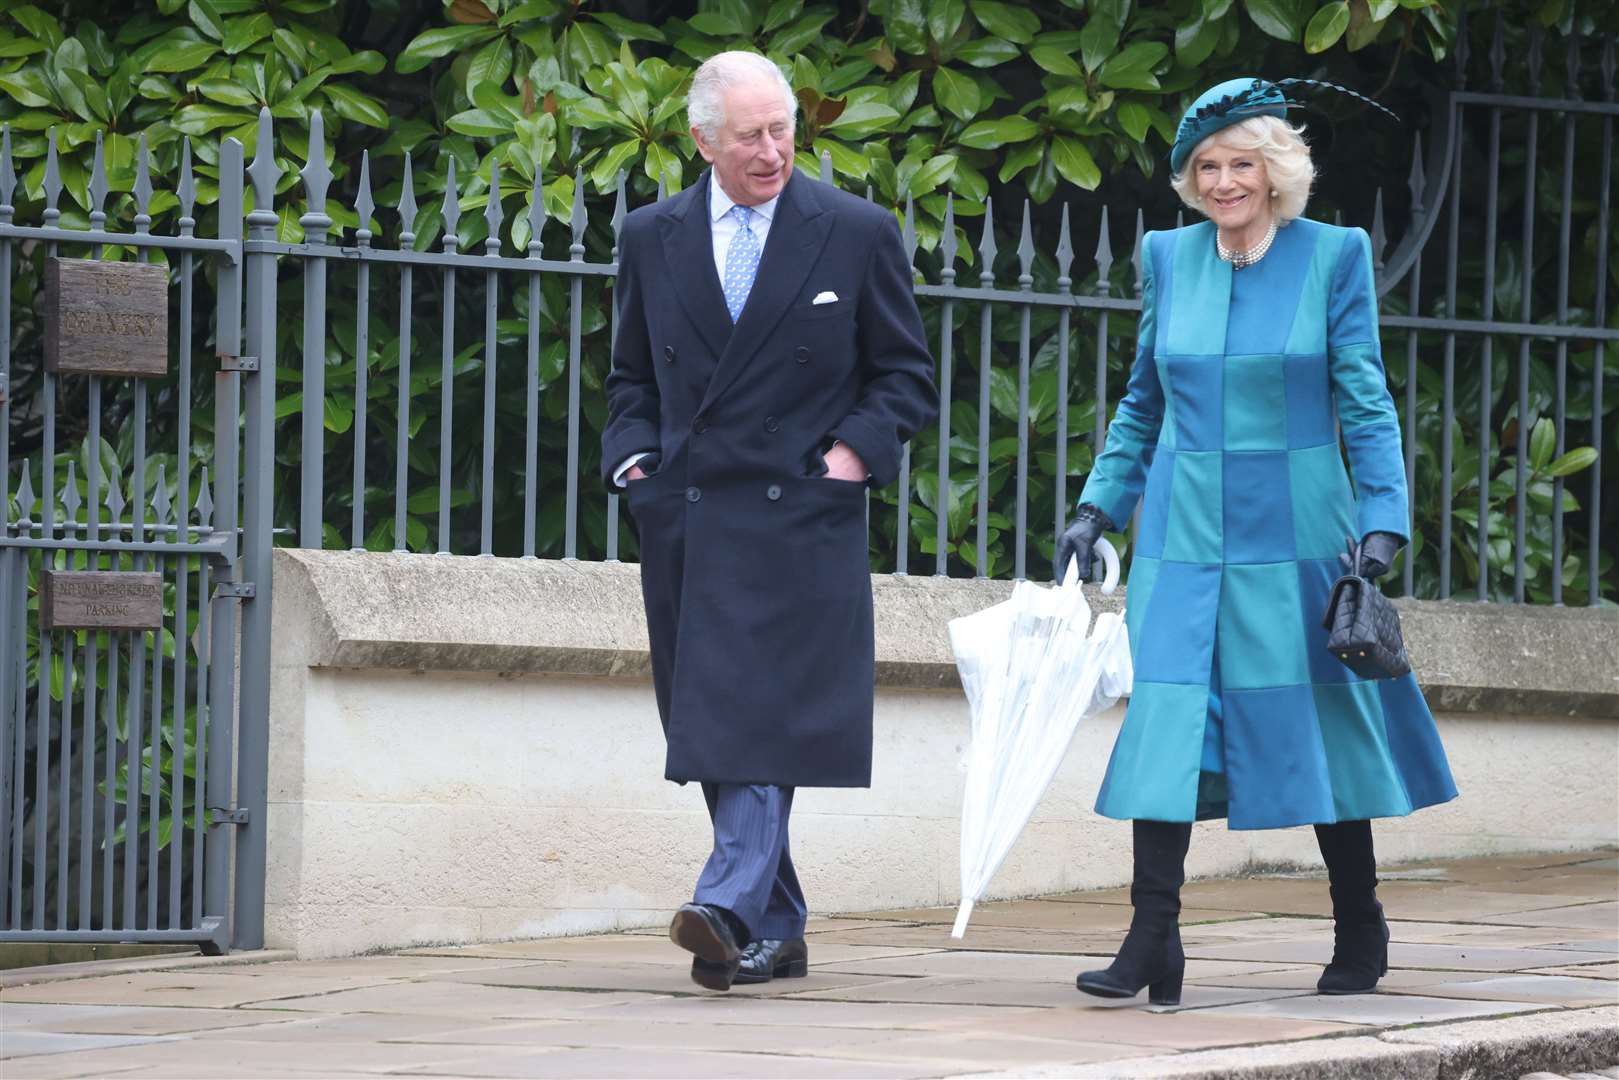 The Prince of Wales and Duchess of Cornwall attended the Christmas Day service at St George’s Chapel, Windsor Castle, and later had lunch with the Queen (Ian Vogler/Daily Mirror/PA)